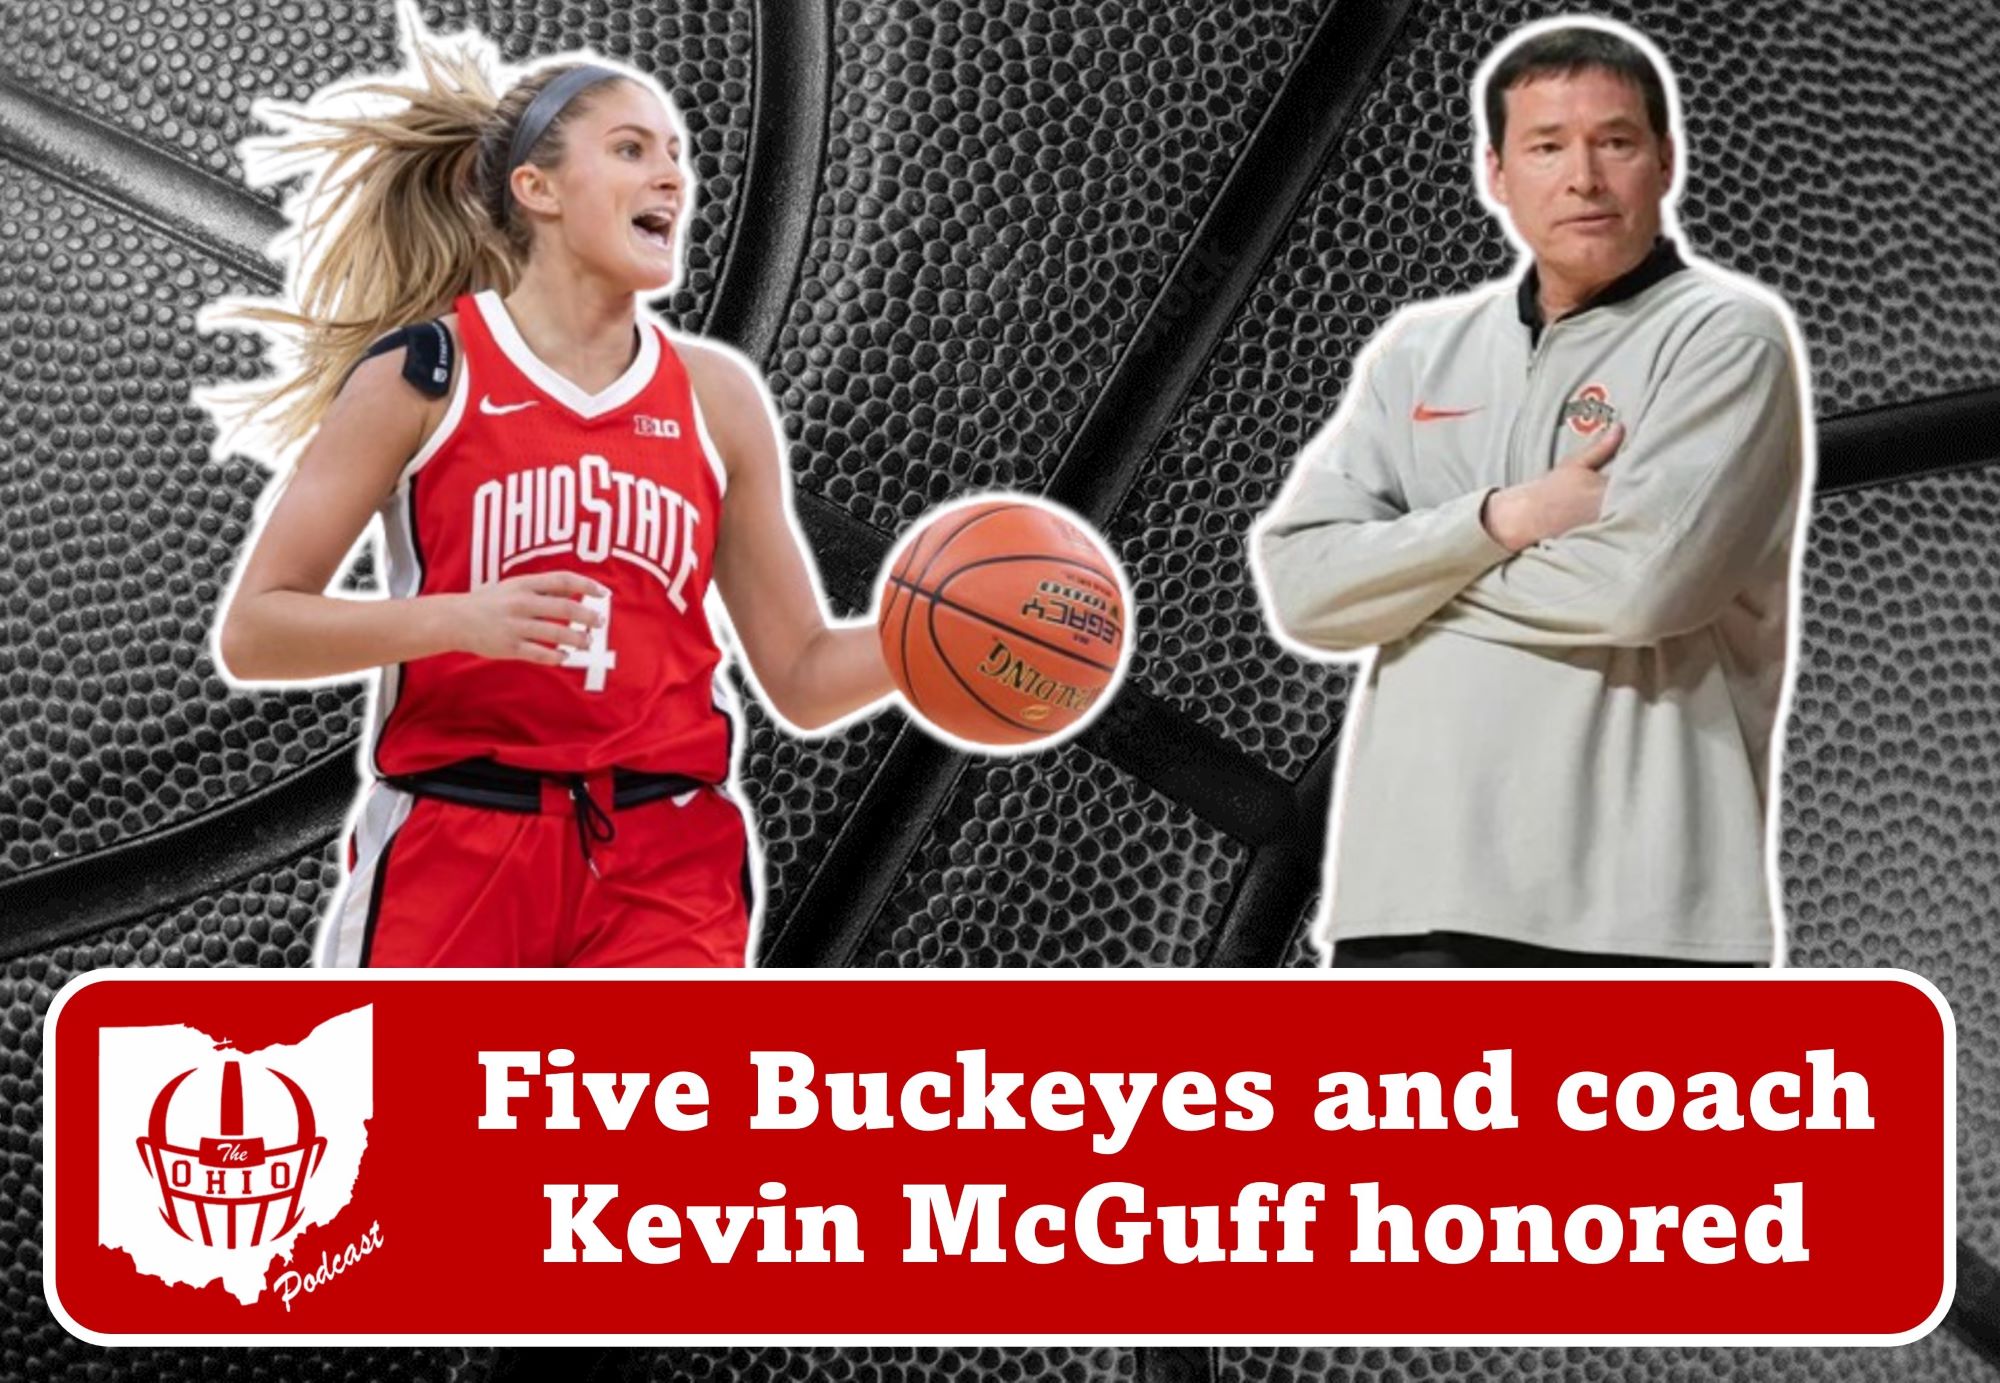 Buckeyes Receive Top Honors as McGuff Clinches Coach of the Year